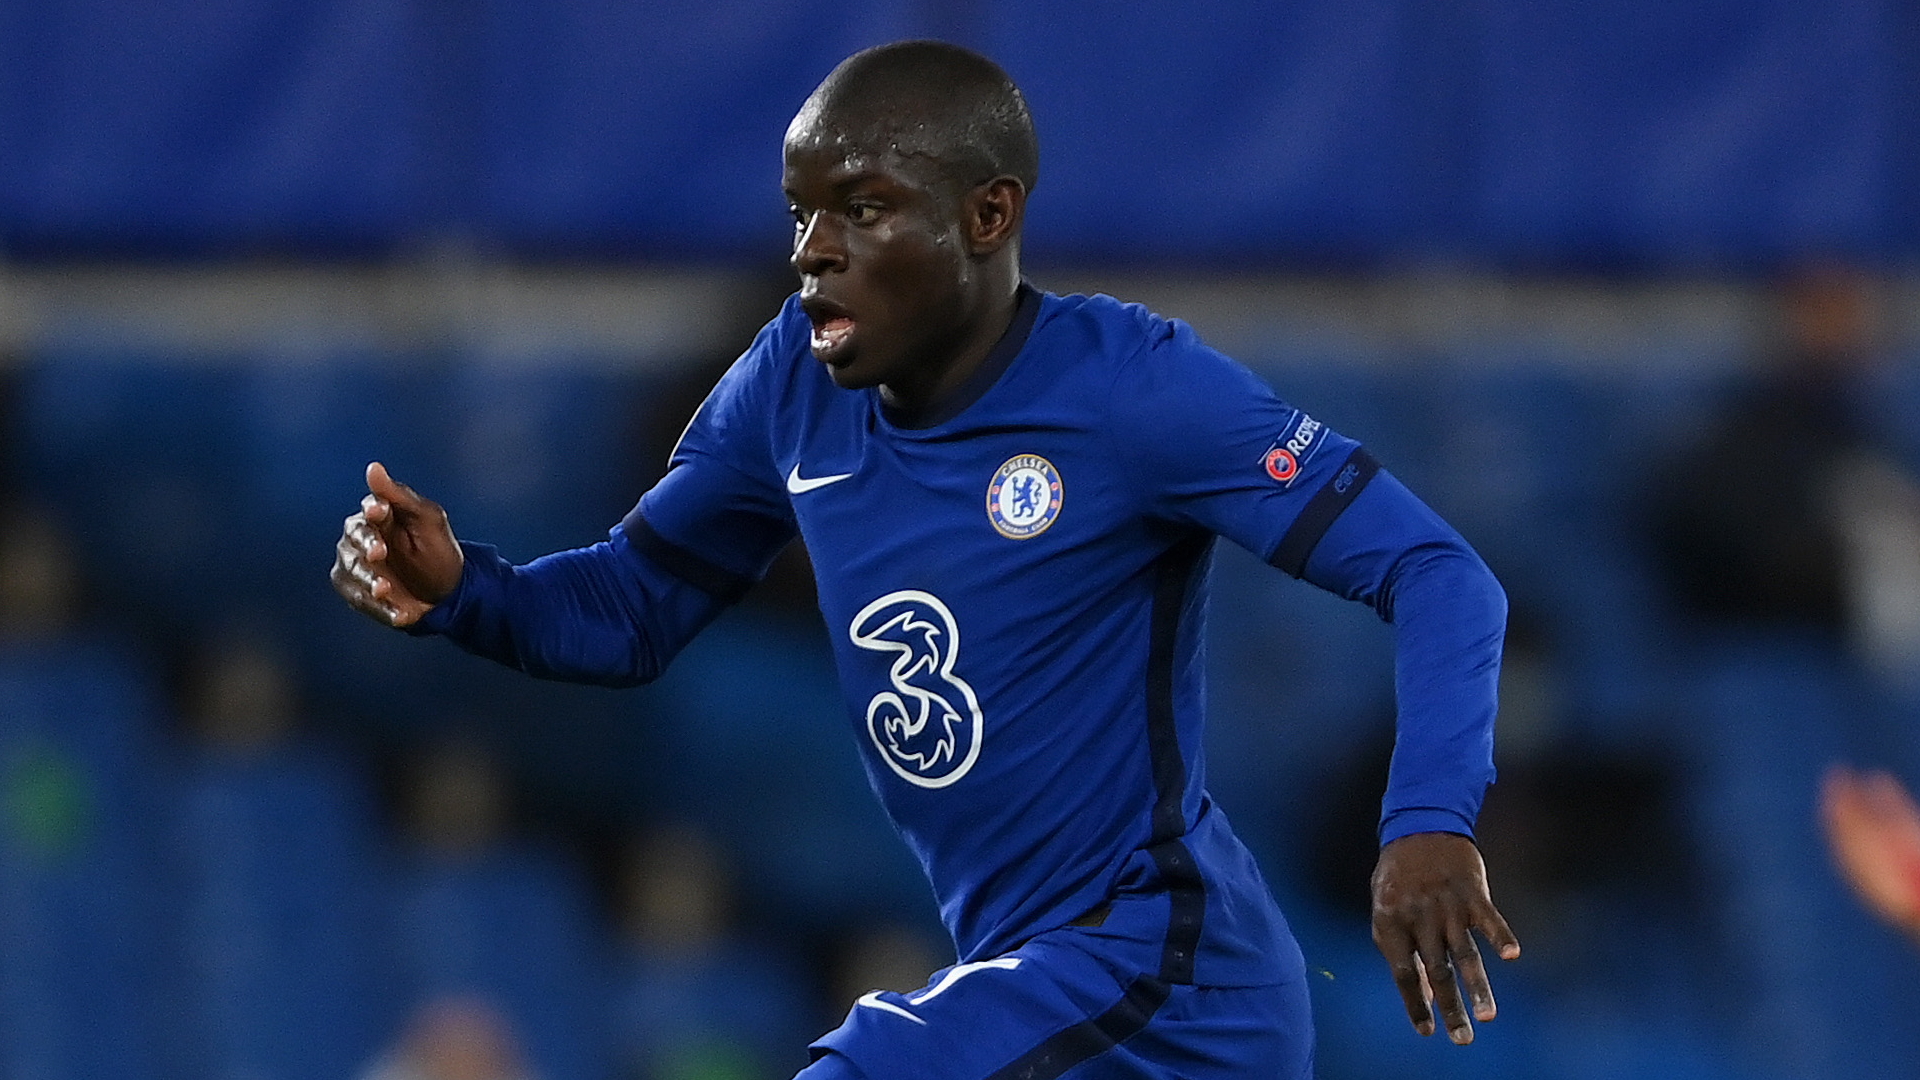 Chelsea and France left sweating on Kante after early Premier League exit against Leicester. The New York Press News Agency